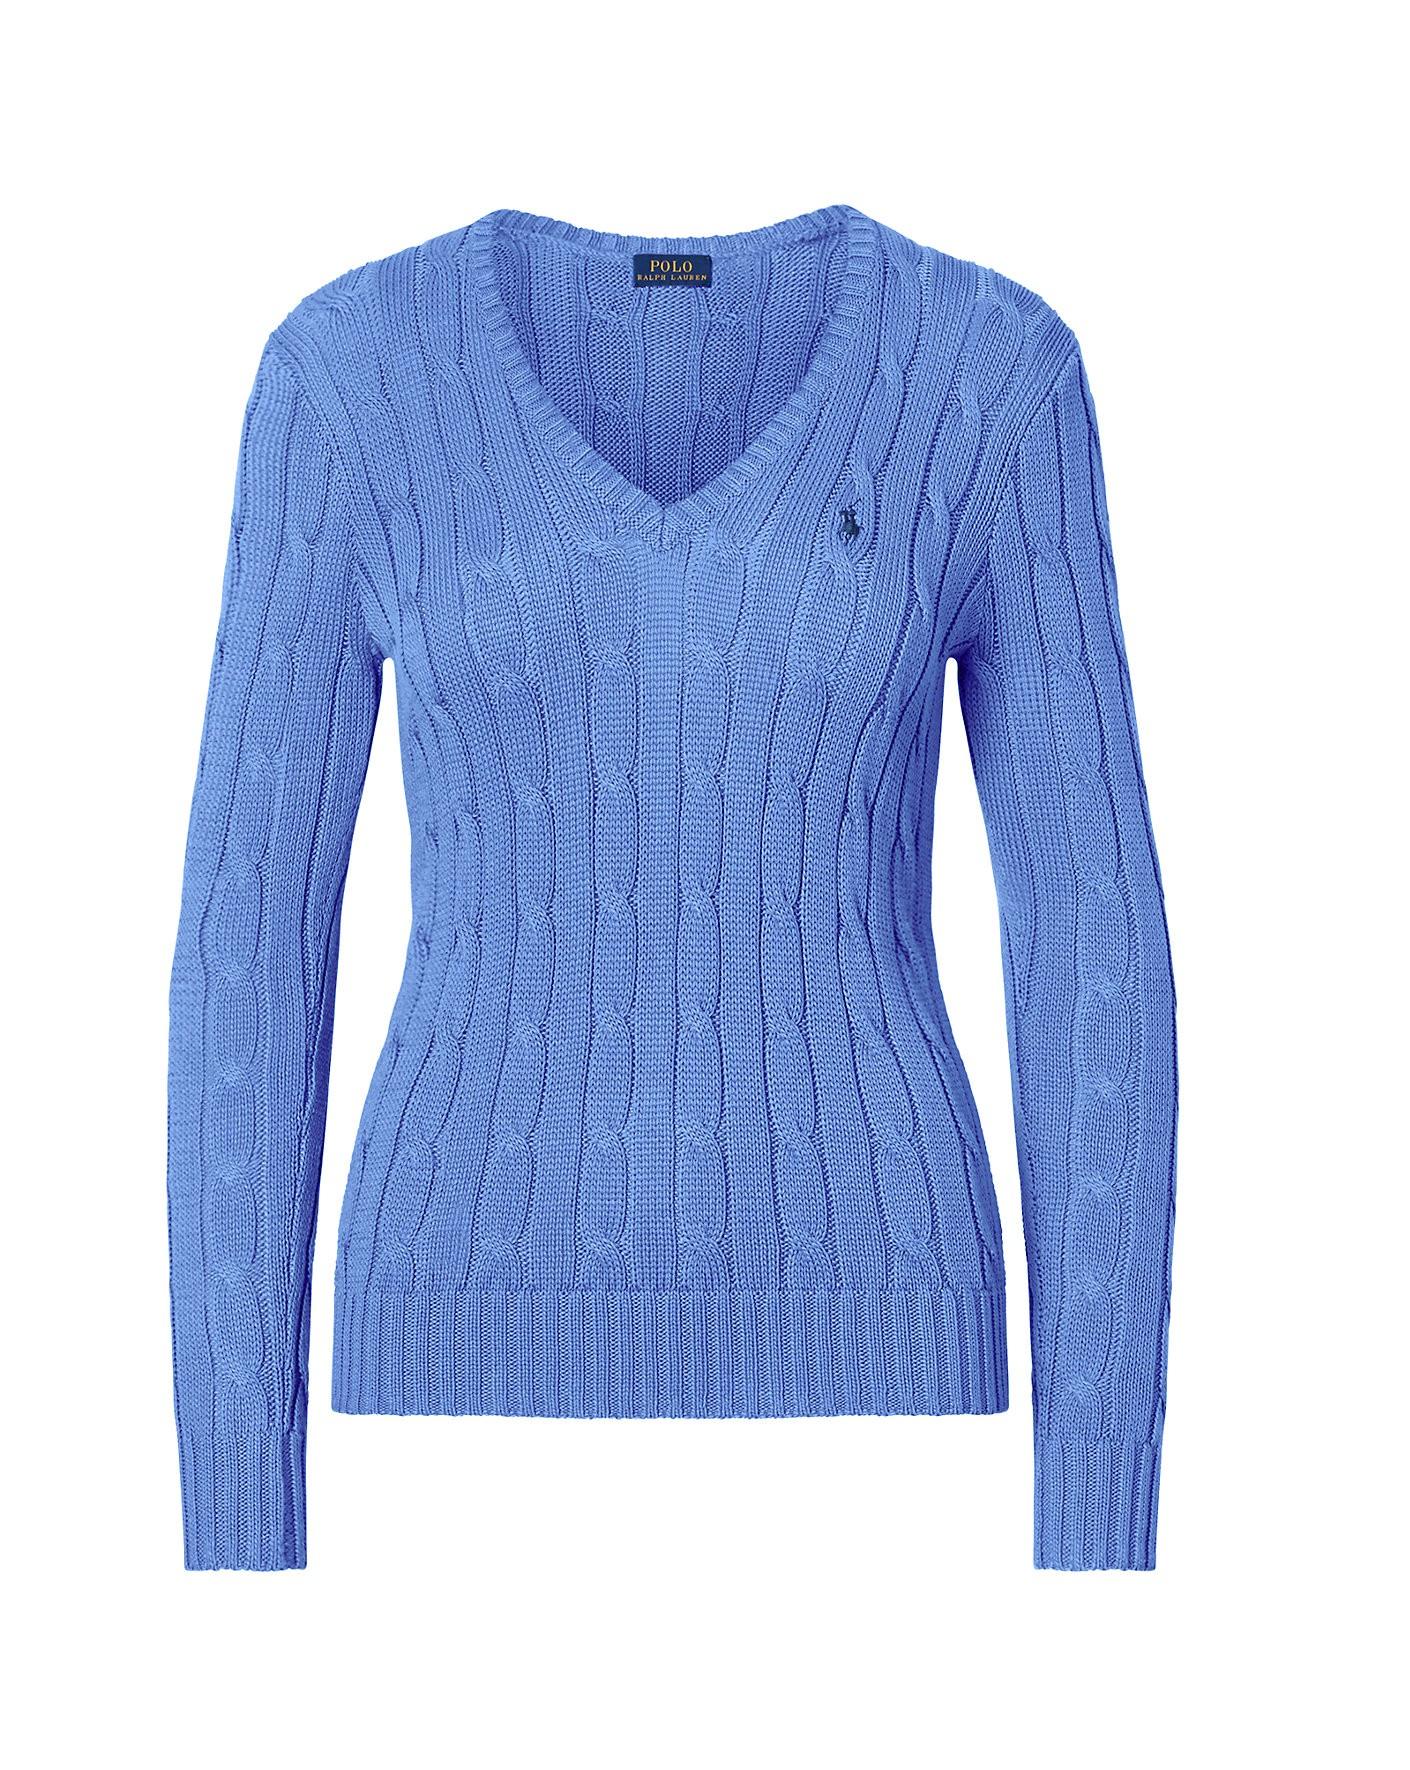 Polo Ralph Lauren Cable-knit Cotton Sweater In Brookfield Blue | ModeSens